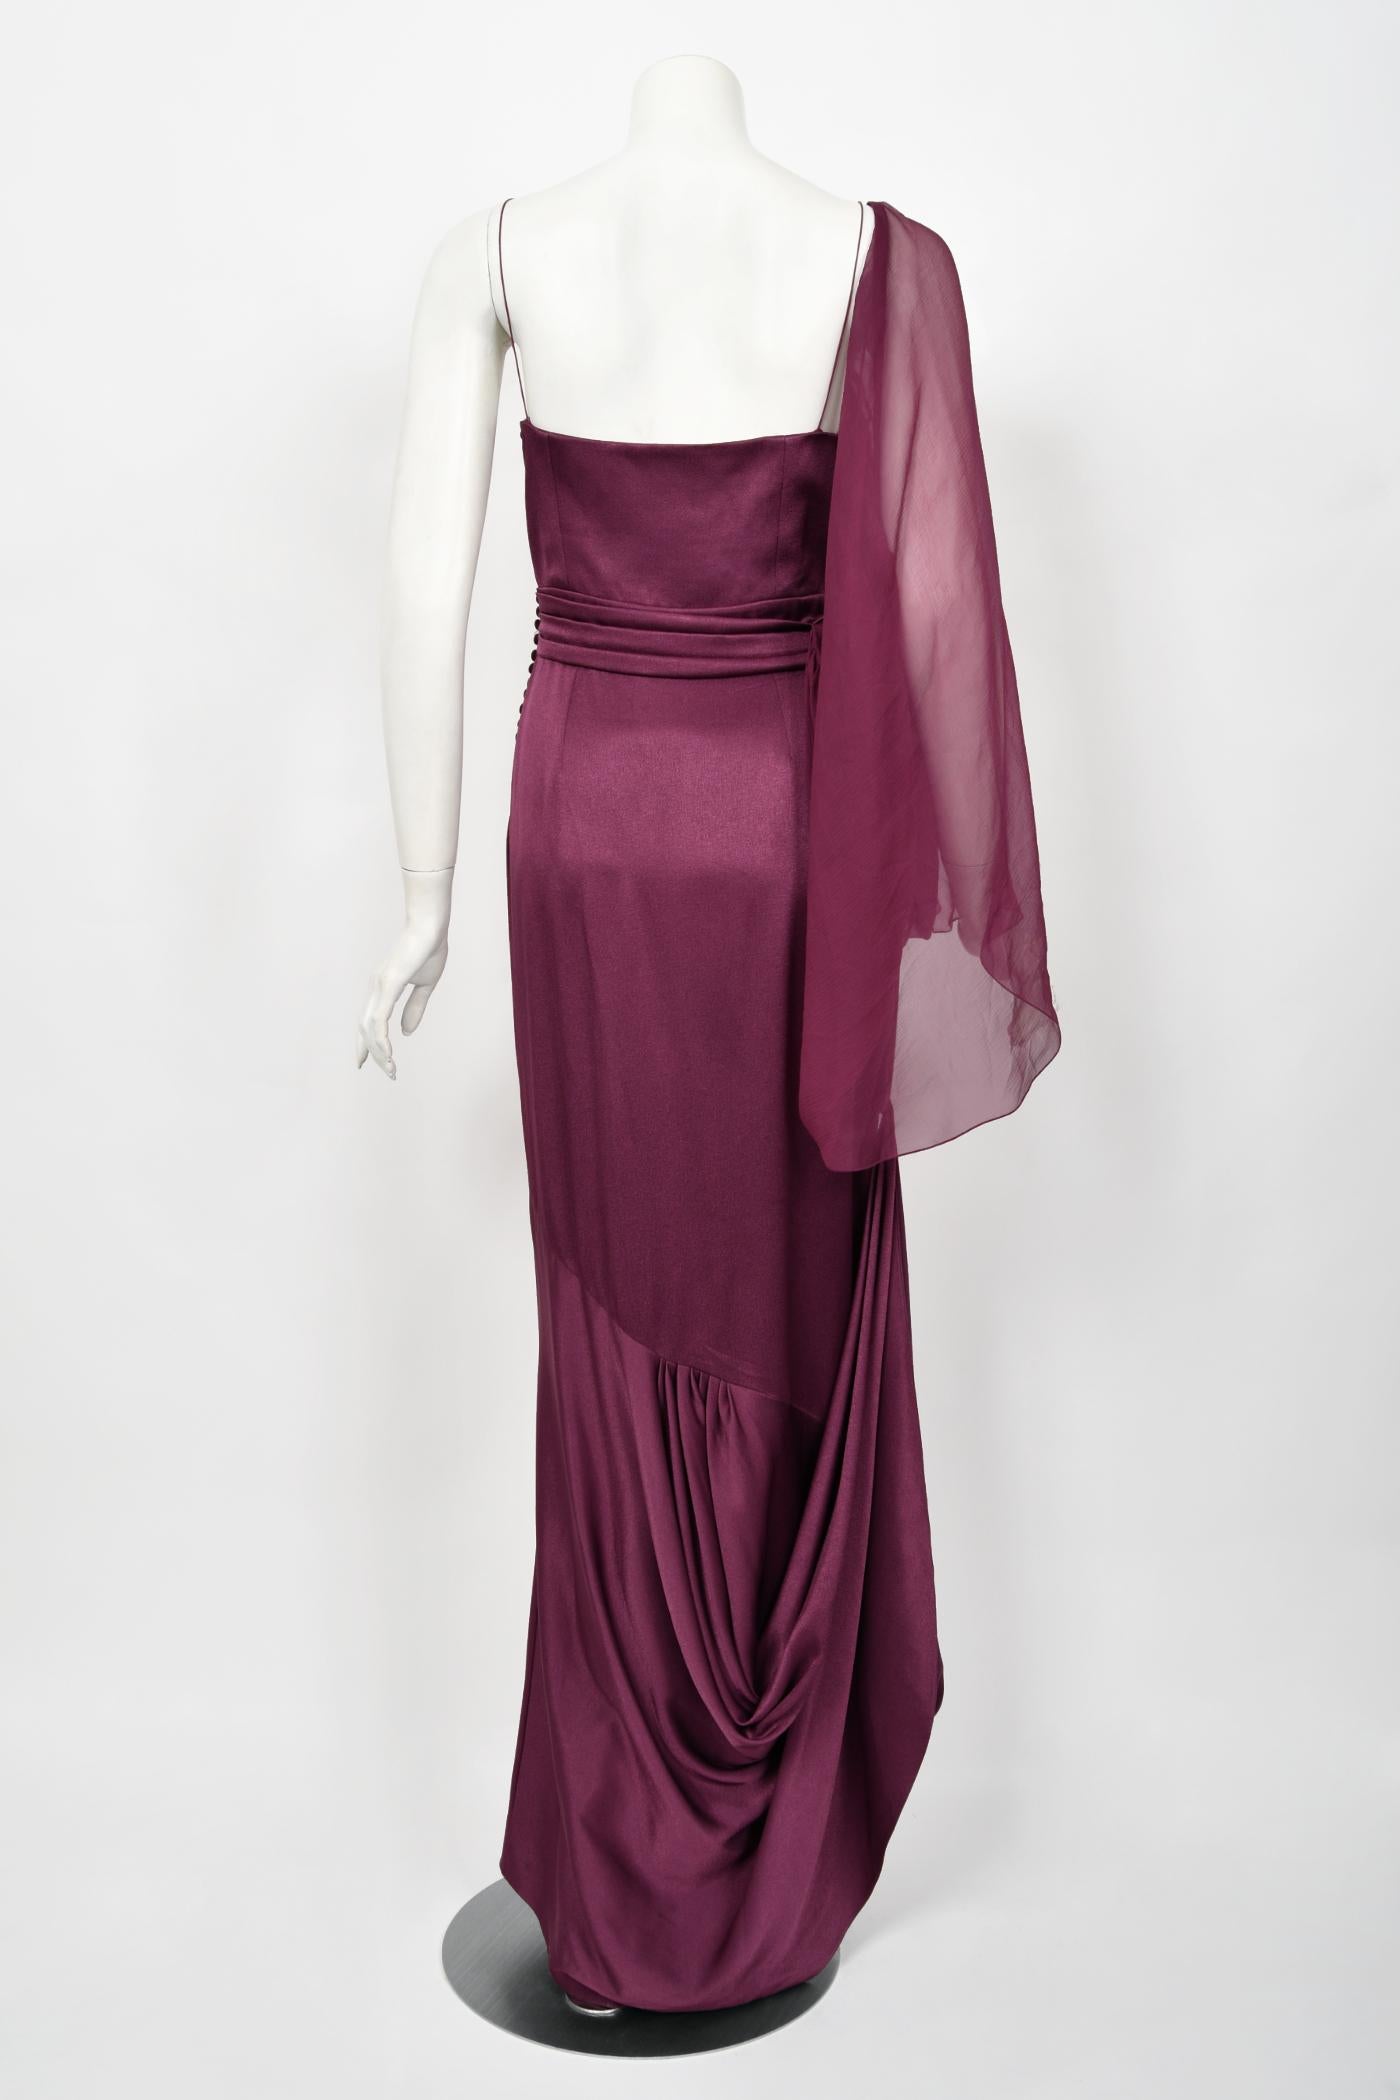 2000 Christian Dior by Galliano Purple Silk Sheer-Sleeve Asymmetric Draped Gown For Sale 7